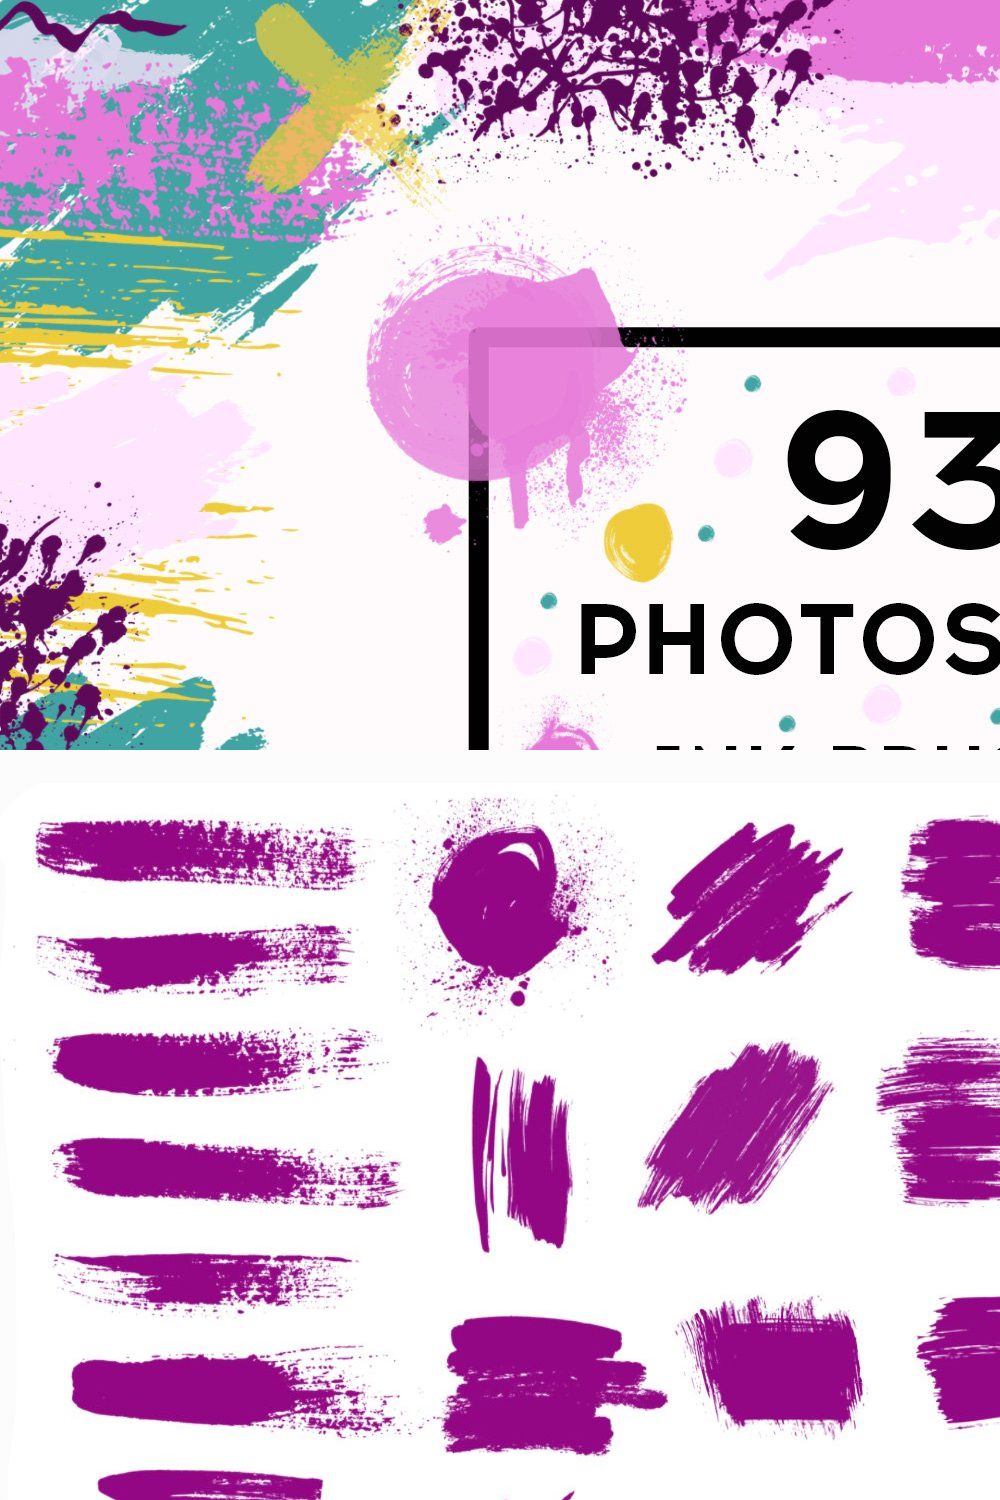 Set 93 Photoshop ink brushes pinterest preview image.